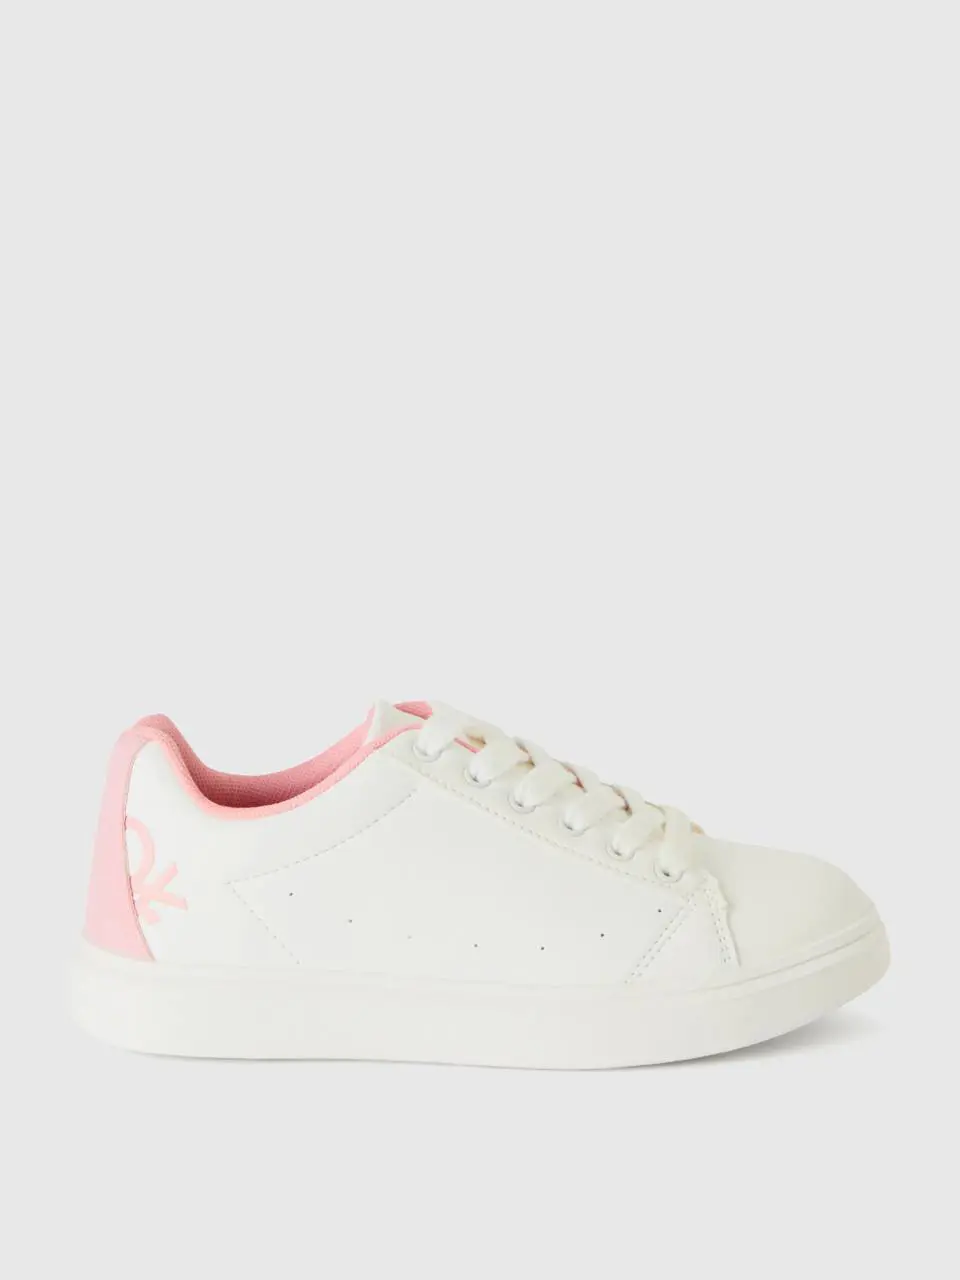 Benetton low-top sneakers with logo. 1